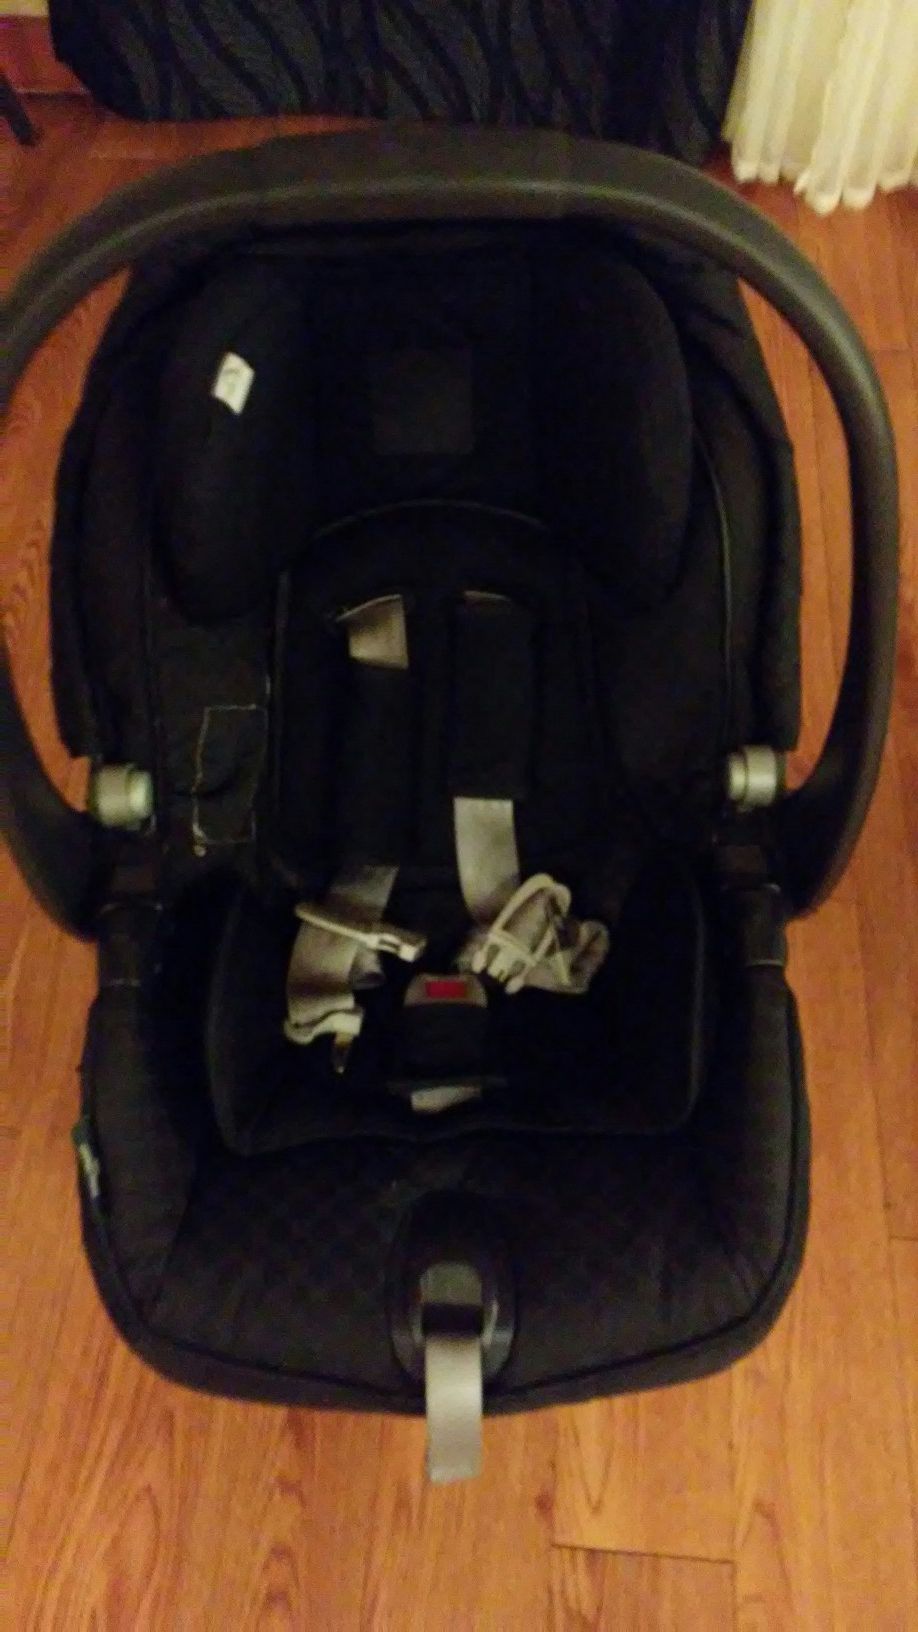 PEG PEREGO car seat, base and stroller combo